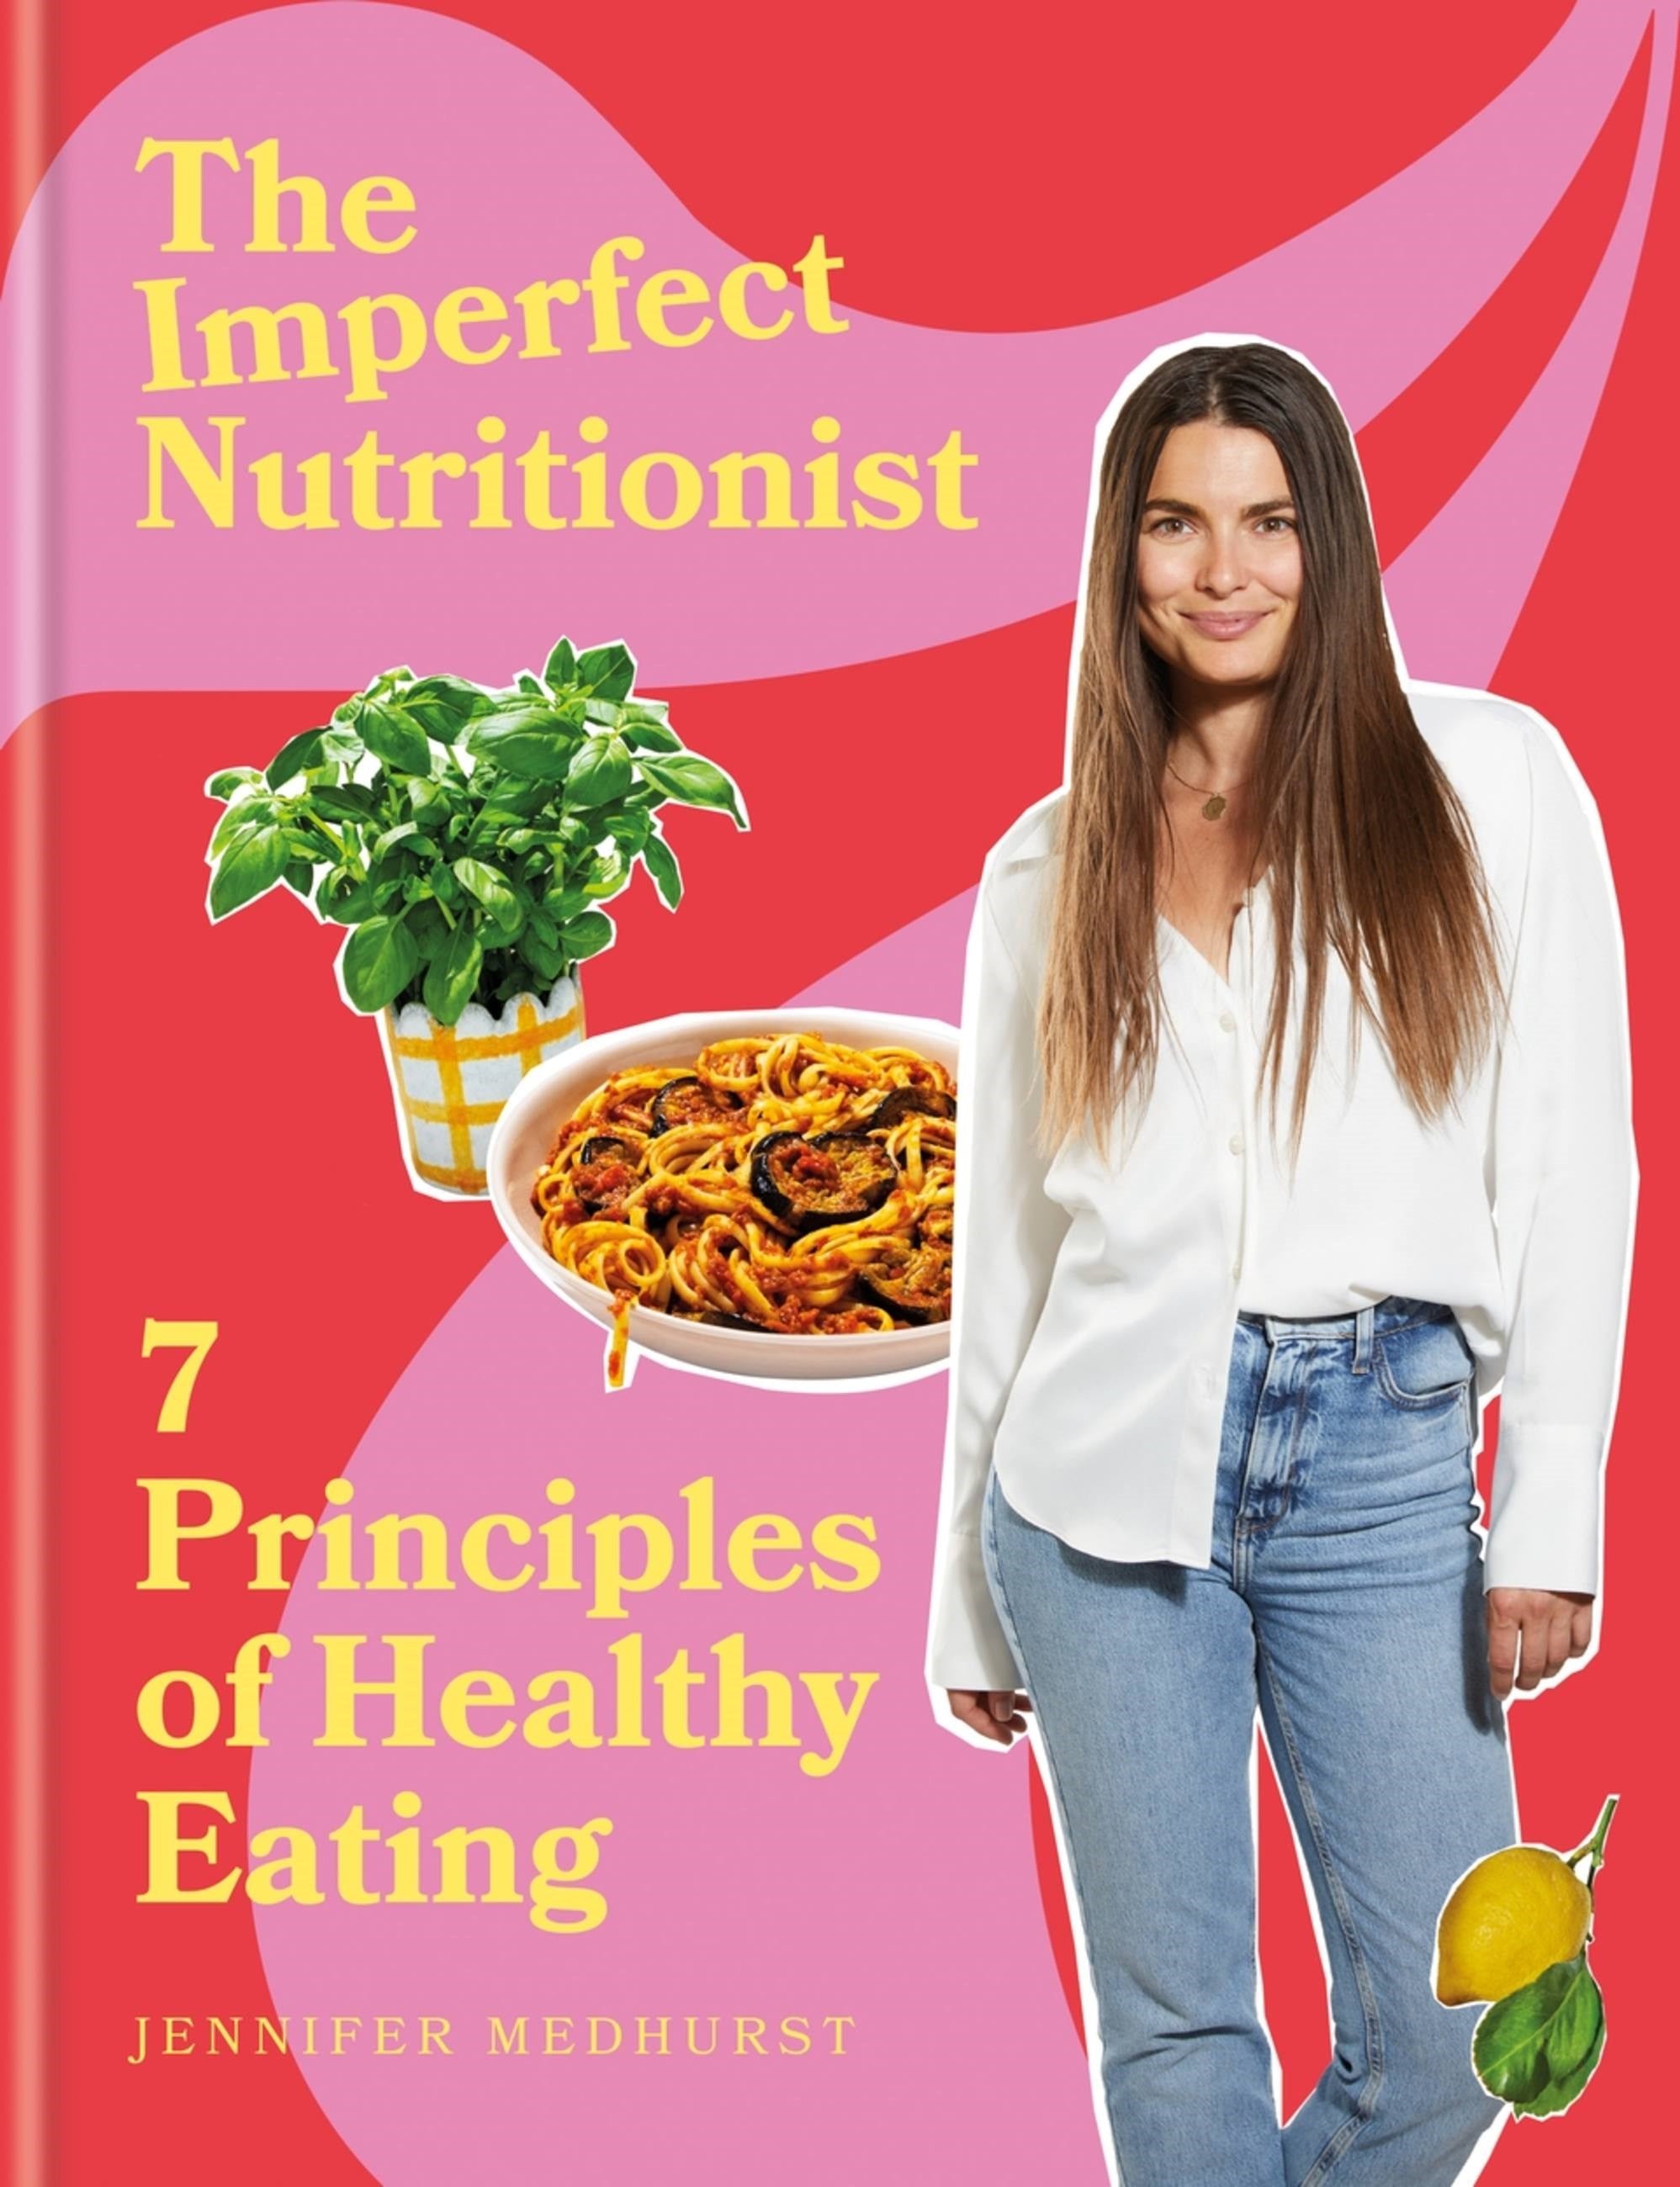 The Imperfect Nutritionist: 7 Principles of Healthy Eating